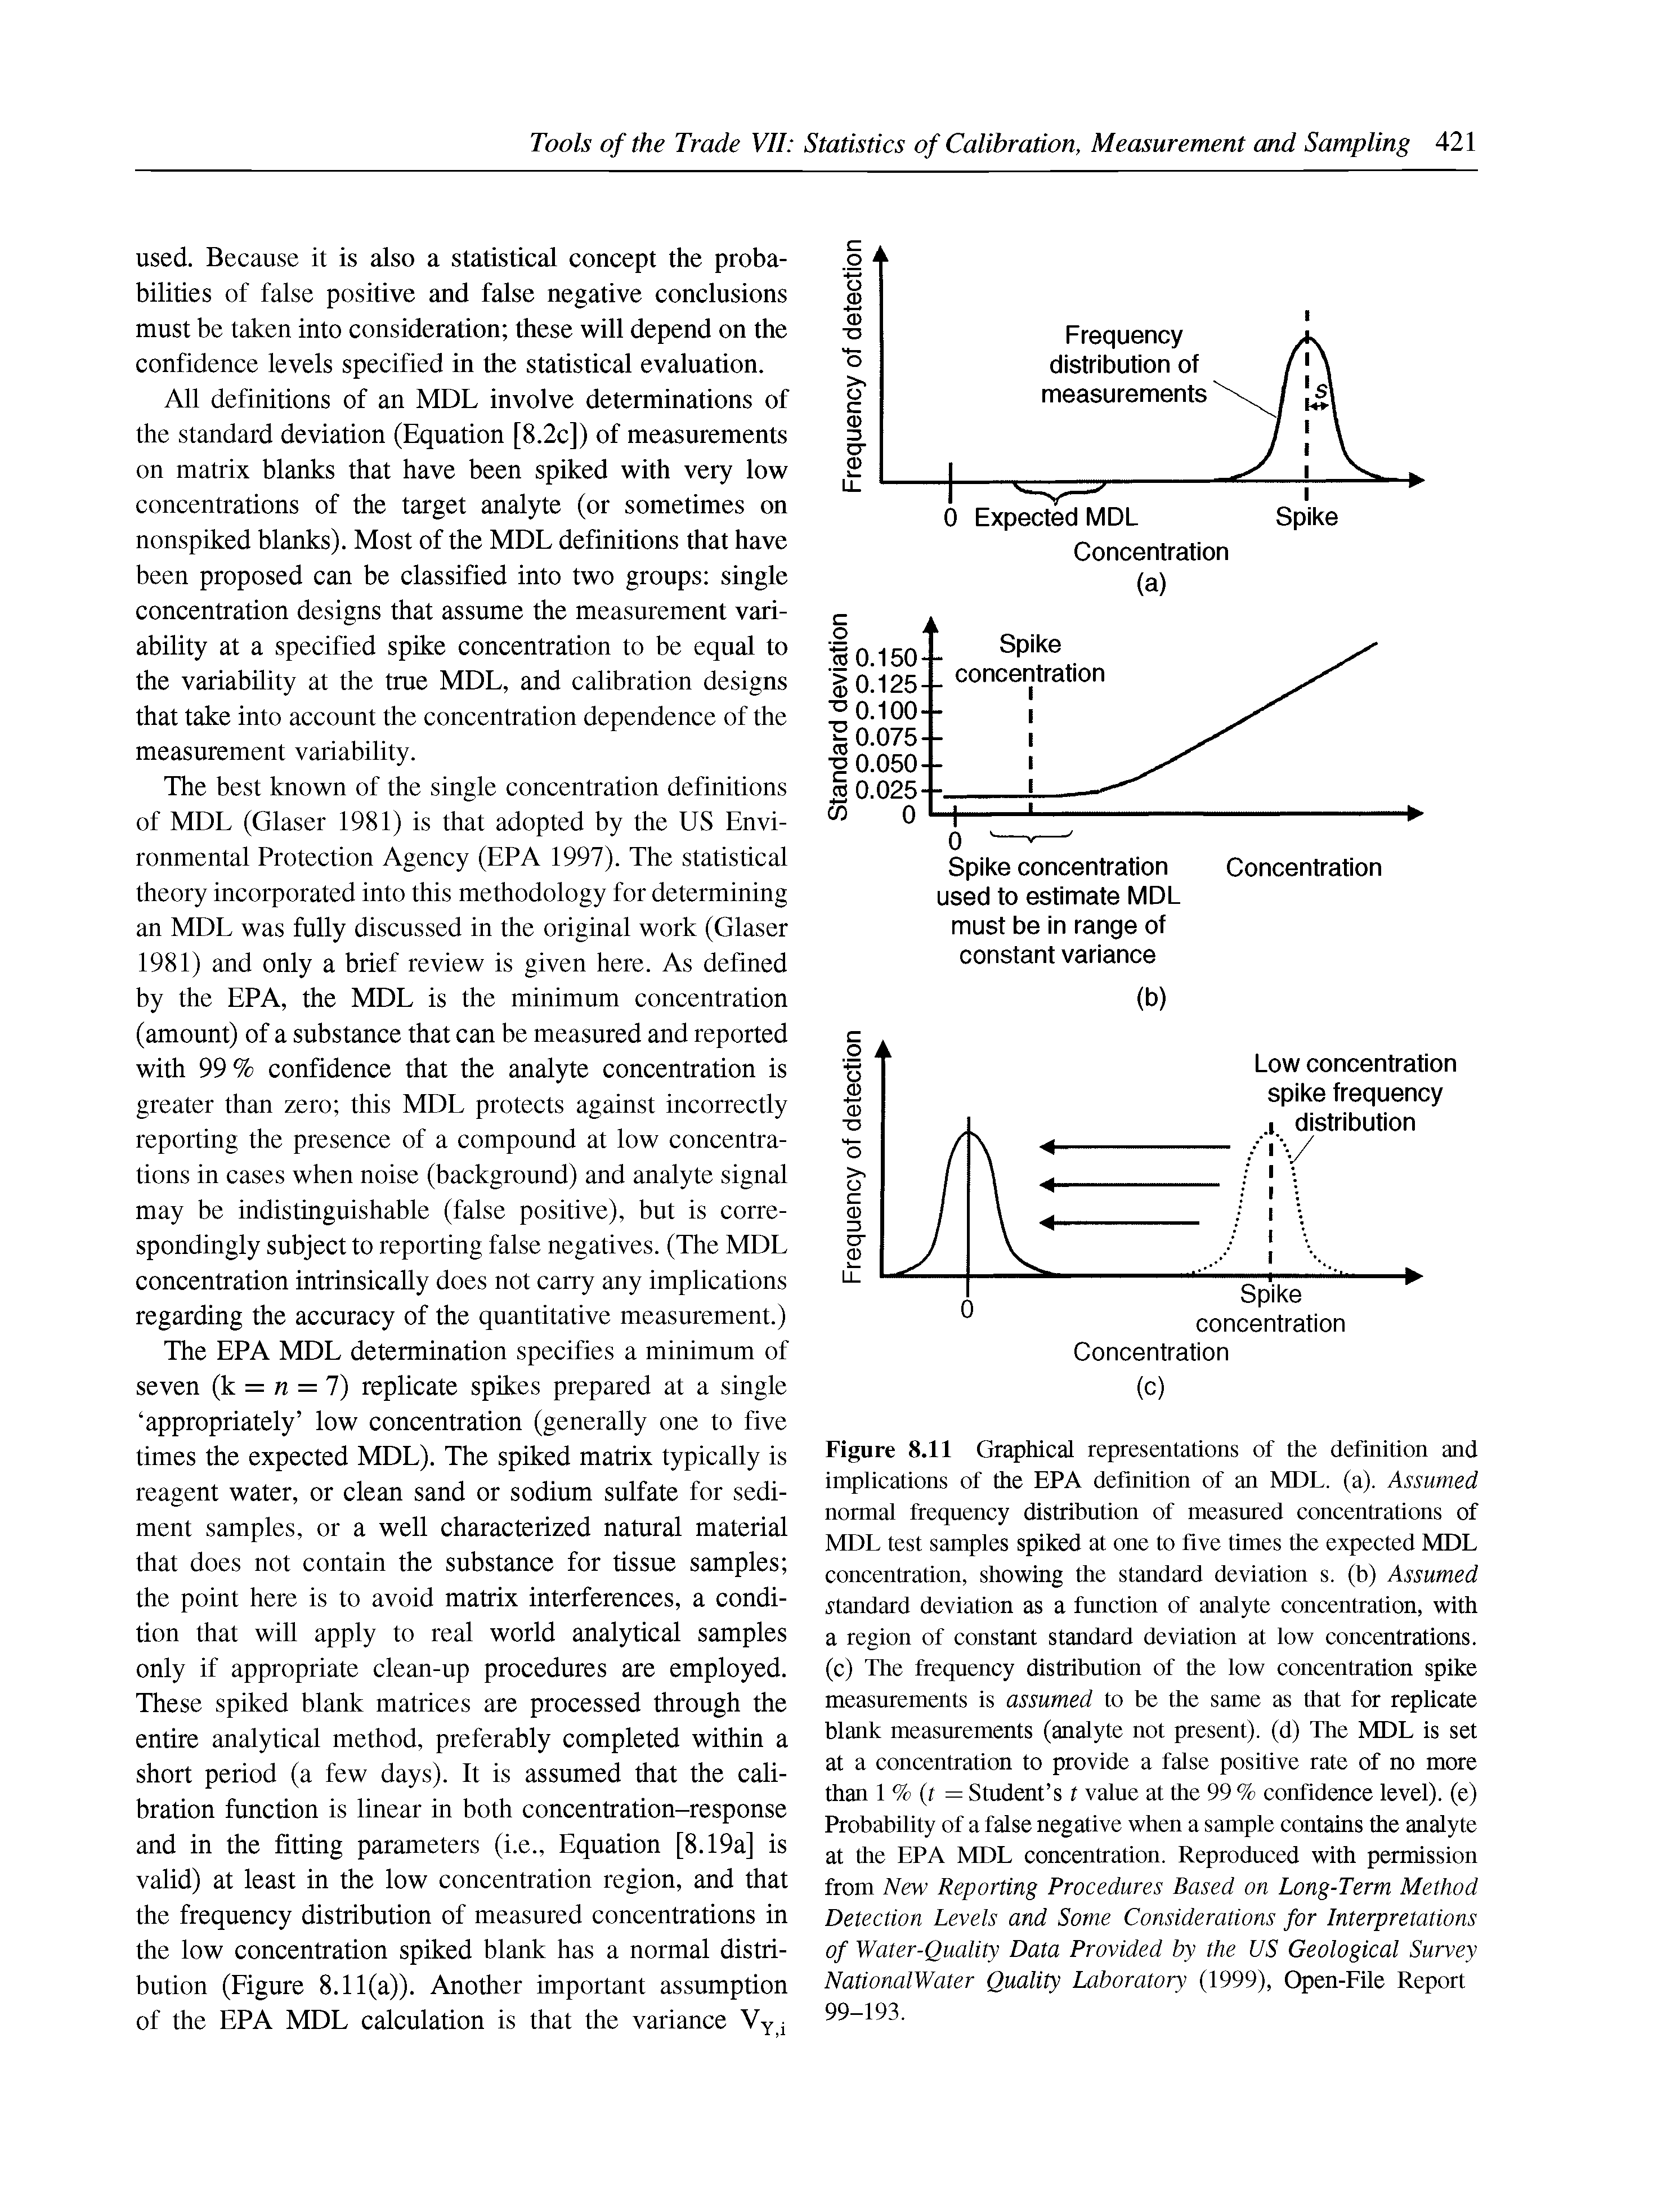 Figure 8.11 Graphical representations of the definition and implications of the EPA definition of an MDL. (a). Assumed normal frequency distribution of measured concentrations of MDL test samples spiked at one to five times the expected MDL concentration, showing the standard deviation s. (b) Assumed standard deviation as a function of analyte concentration, with a region of constant standard deviation at low concentrations, (c) The frequency distribution of the low concentration spike measurements is assumed to be the same as that for replicate blank measurements (analyte not present), (d) The MDL is set at a concentration to provide a false positive rate of no more than 1% (t = Student s t value at the 99 % confidence level), (e) Probability of a false negative when a sample contains the analyte at the EPA MDL concentration. Reproduced with permission from New Reporting Procedures Based on Long-Term Method Detection Levels and Some Considerations for Interpretations of Water-Quality Data Provided by the US Geological Survey NationalWater Quality Laboratory (1999), Open-File Report 99-193.